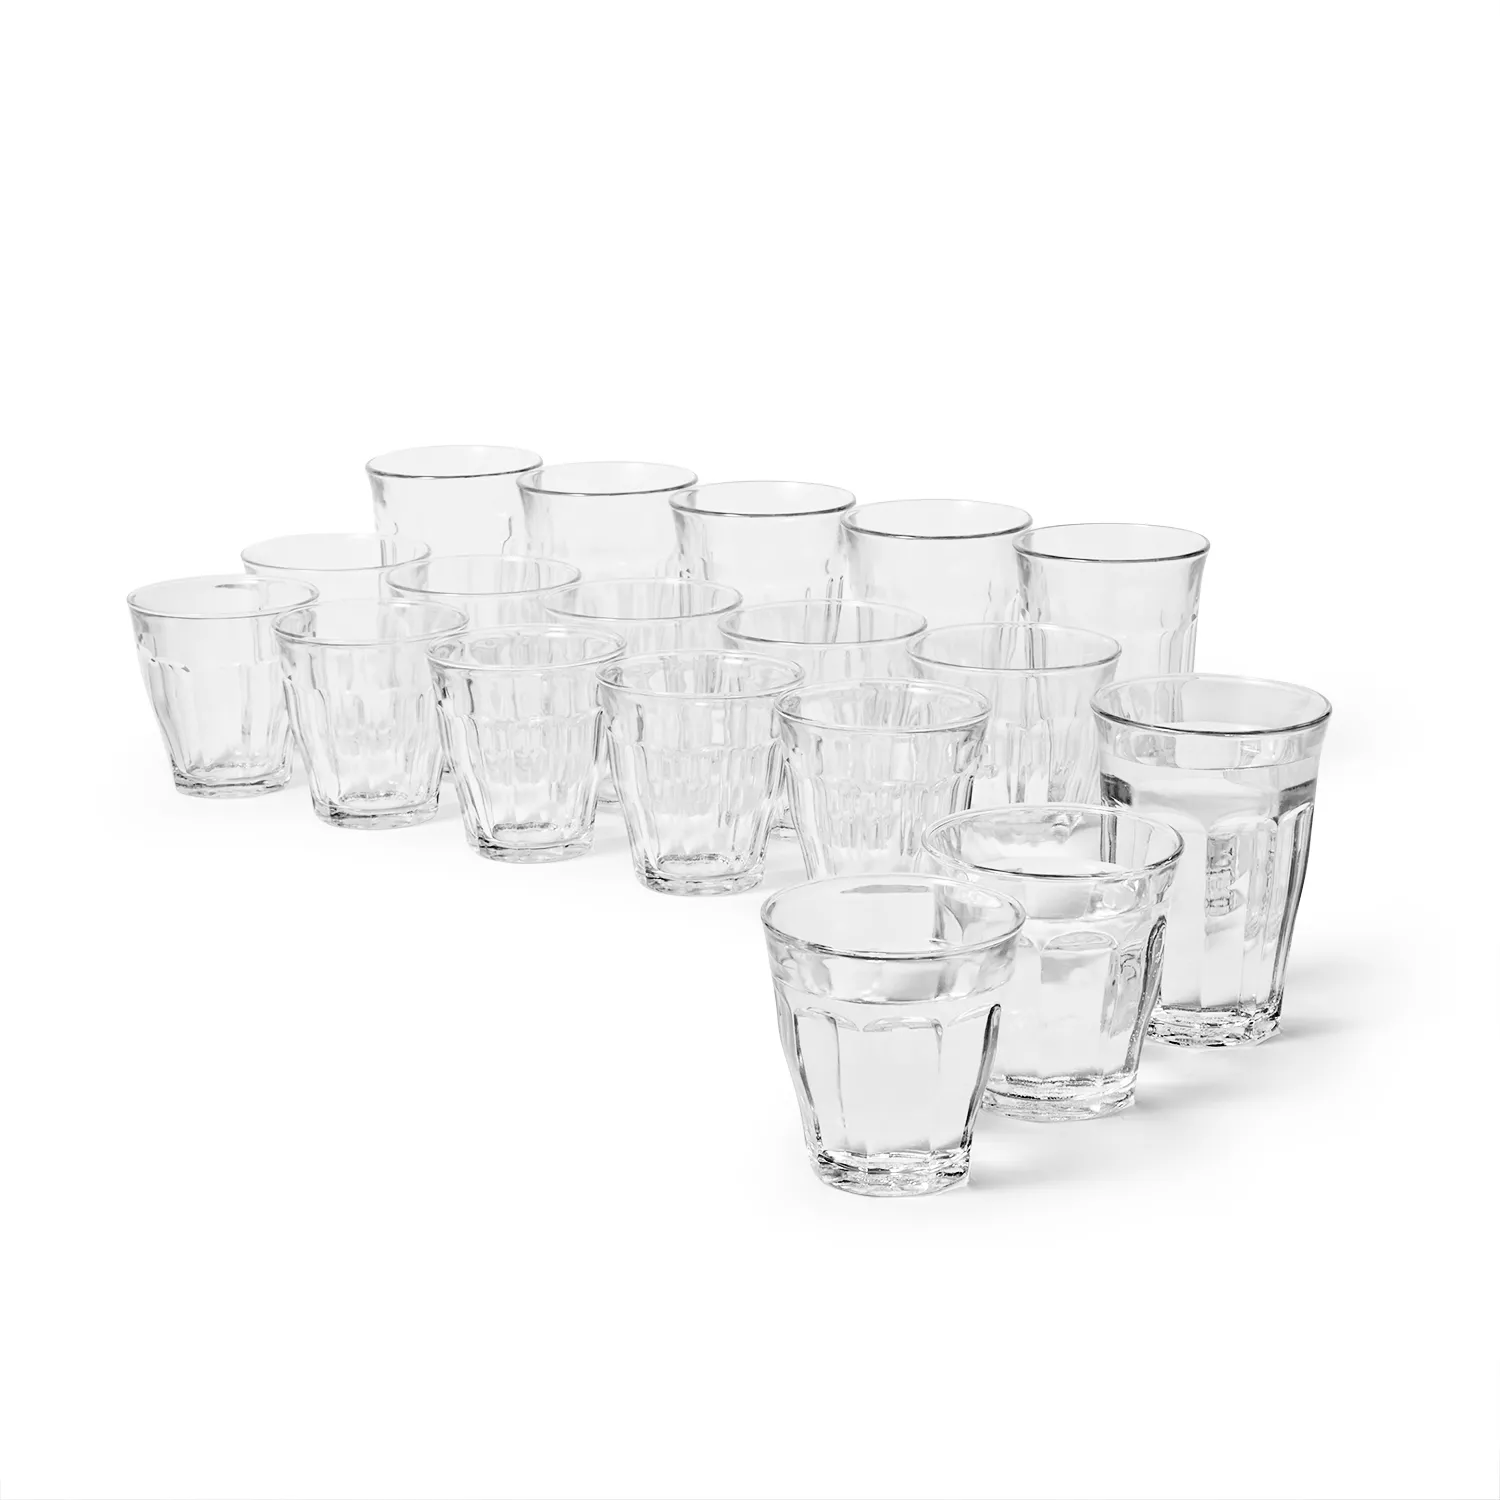 6 Small Water GLASSES 10 Cl in Vintage DURALEX Tempered Glass 